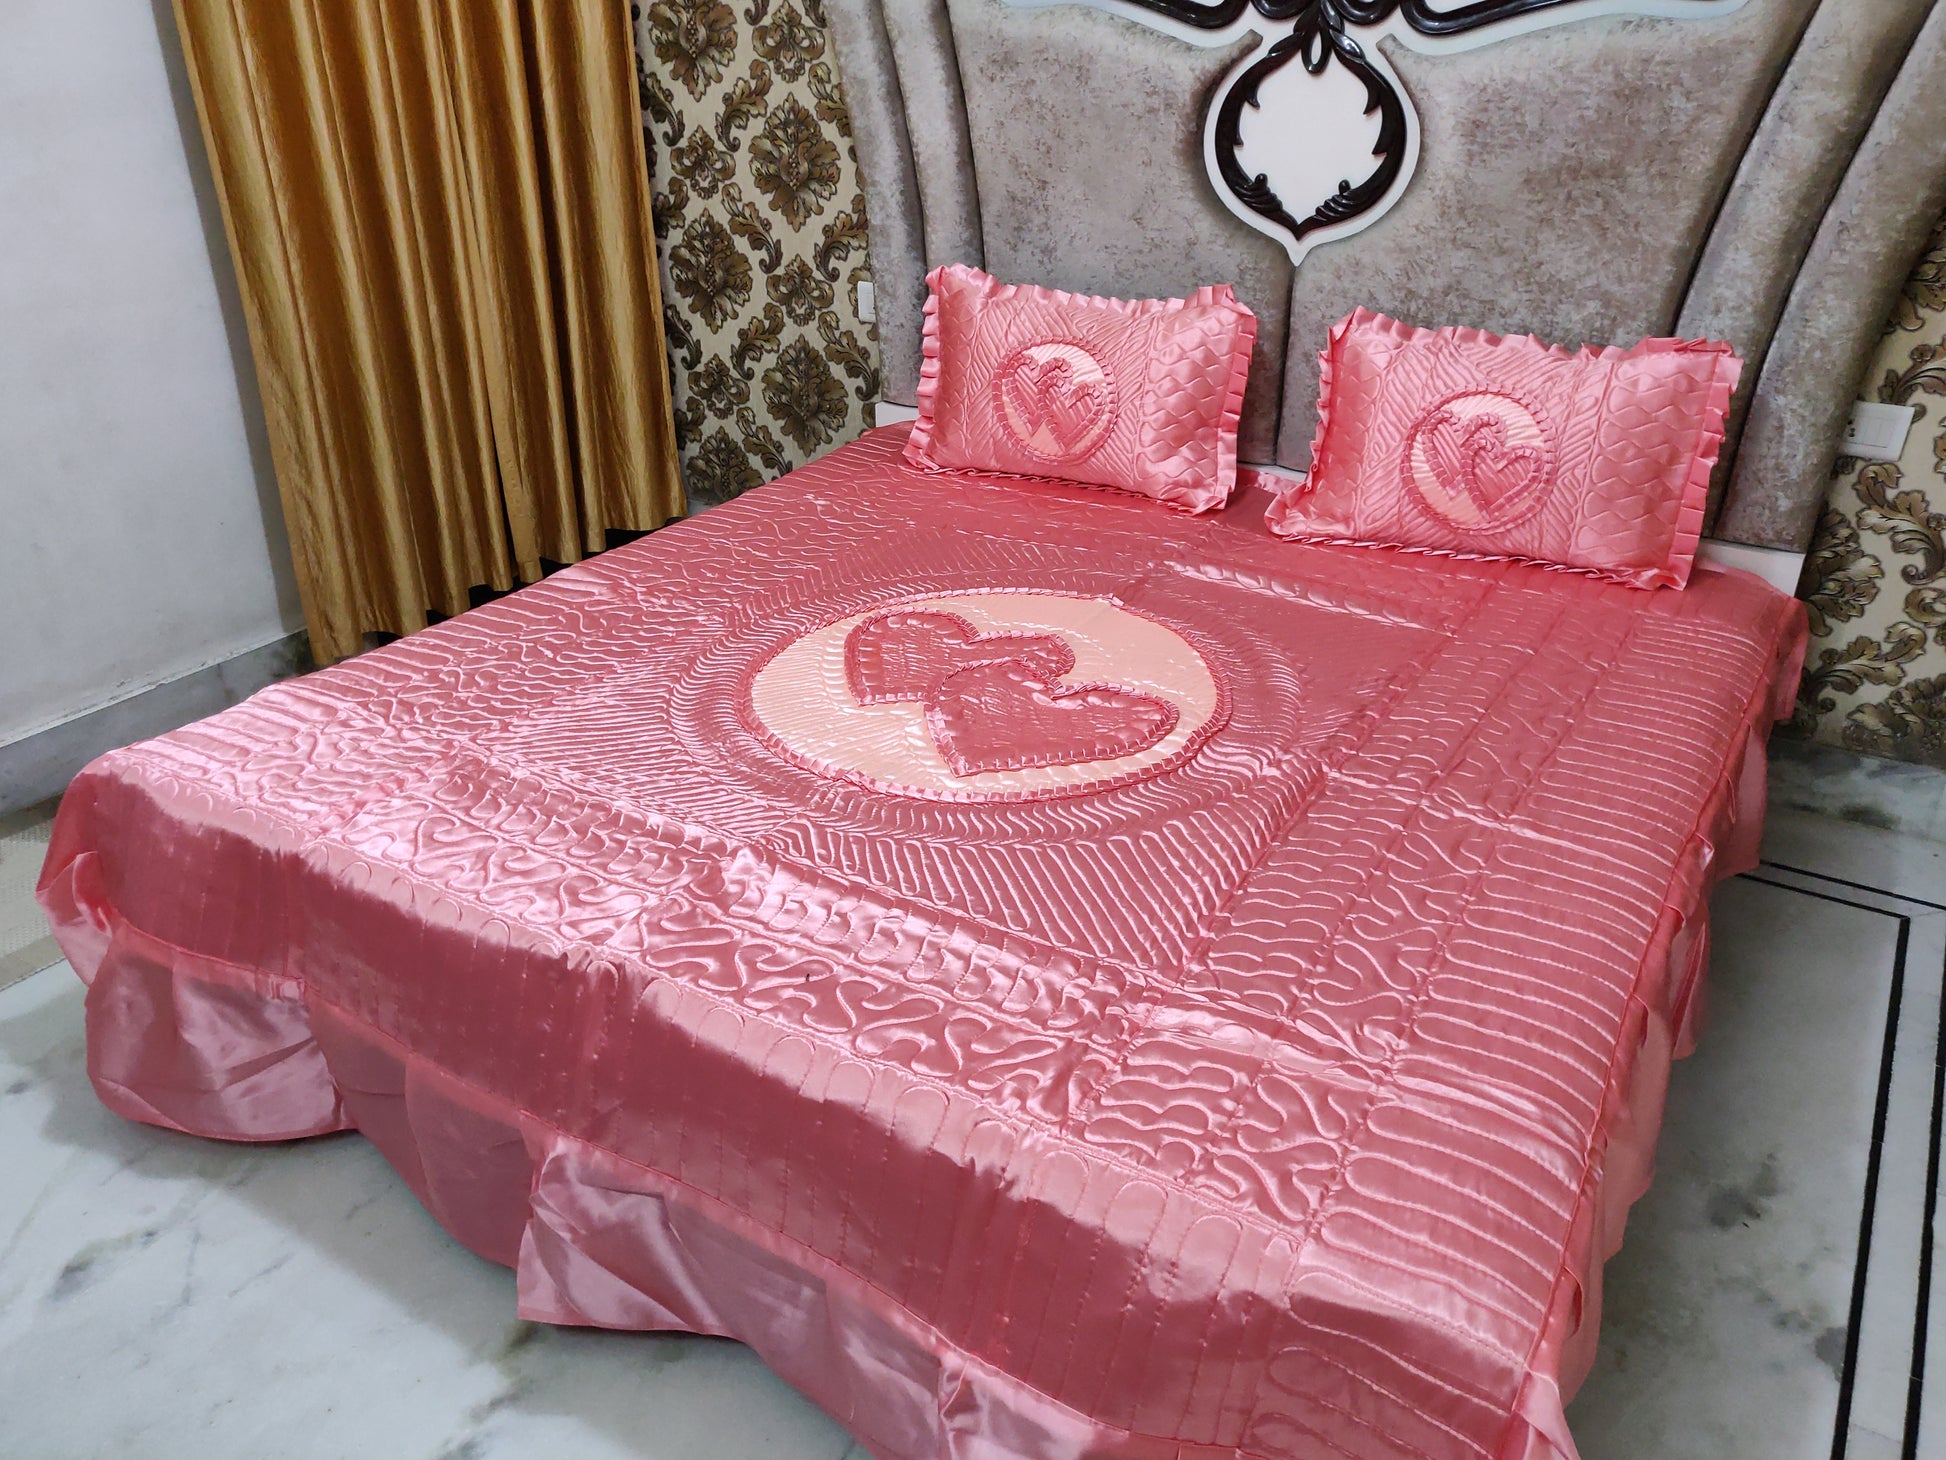 loomsmith-satin-quilted-wedding-bedsheet-in-king-size-pink-color-with-two-pillow-covers-hearts-in-center-and-on-pillow-cover